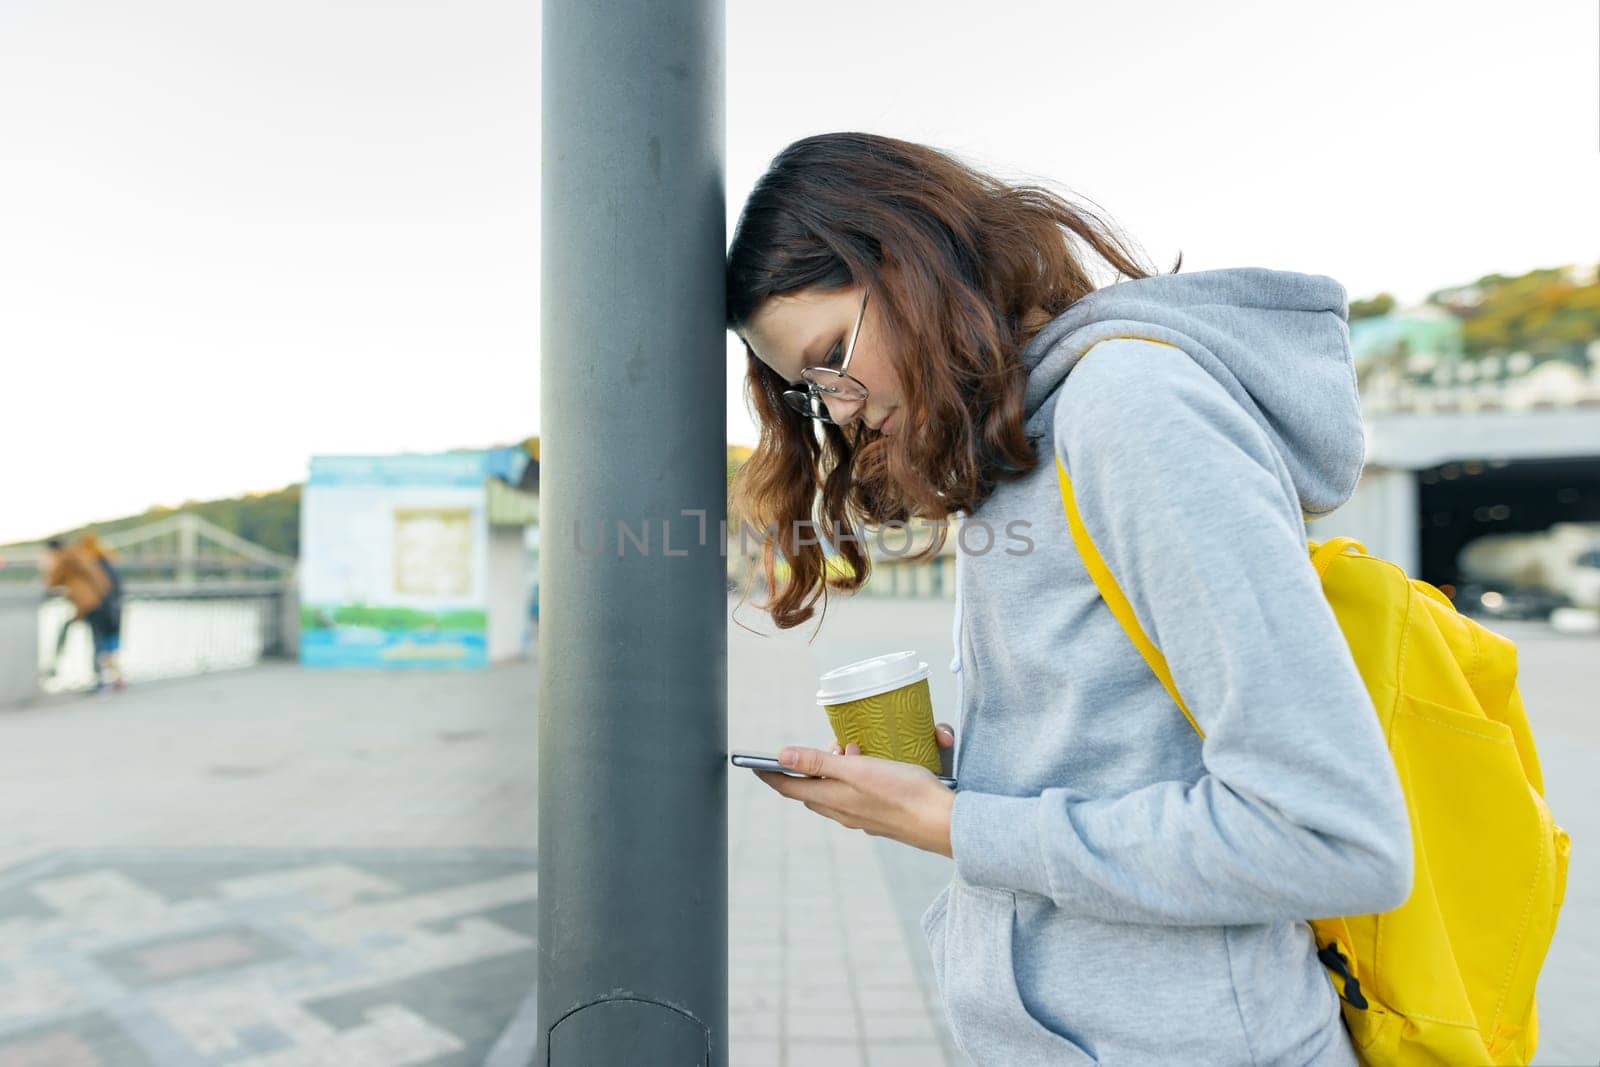 Smart focused girl is distracted by mobile phone, girl reading smartphone, head on a pole